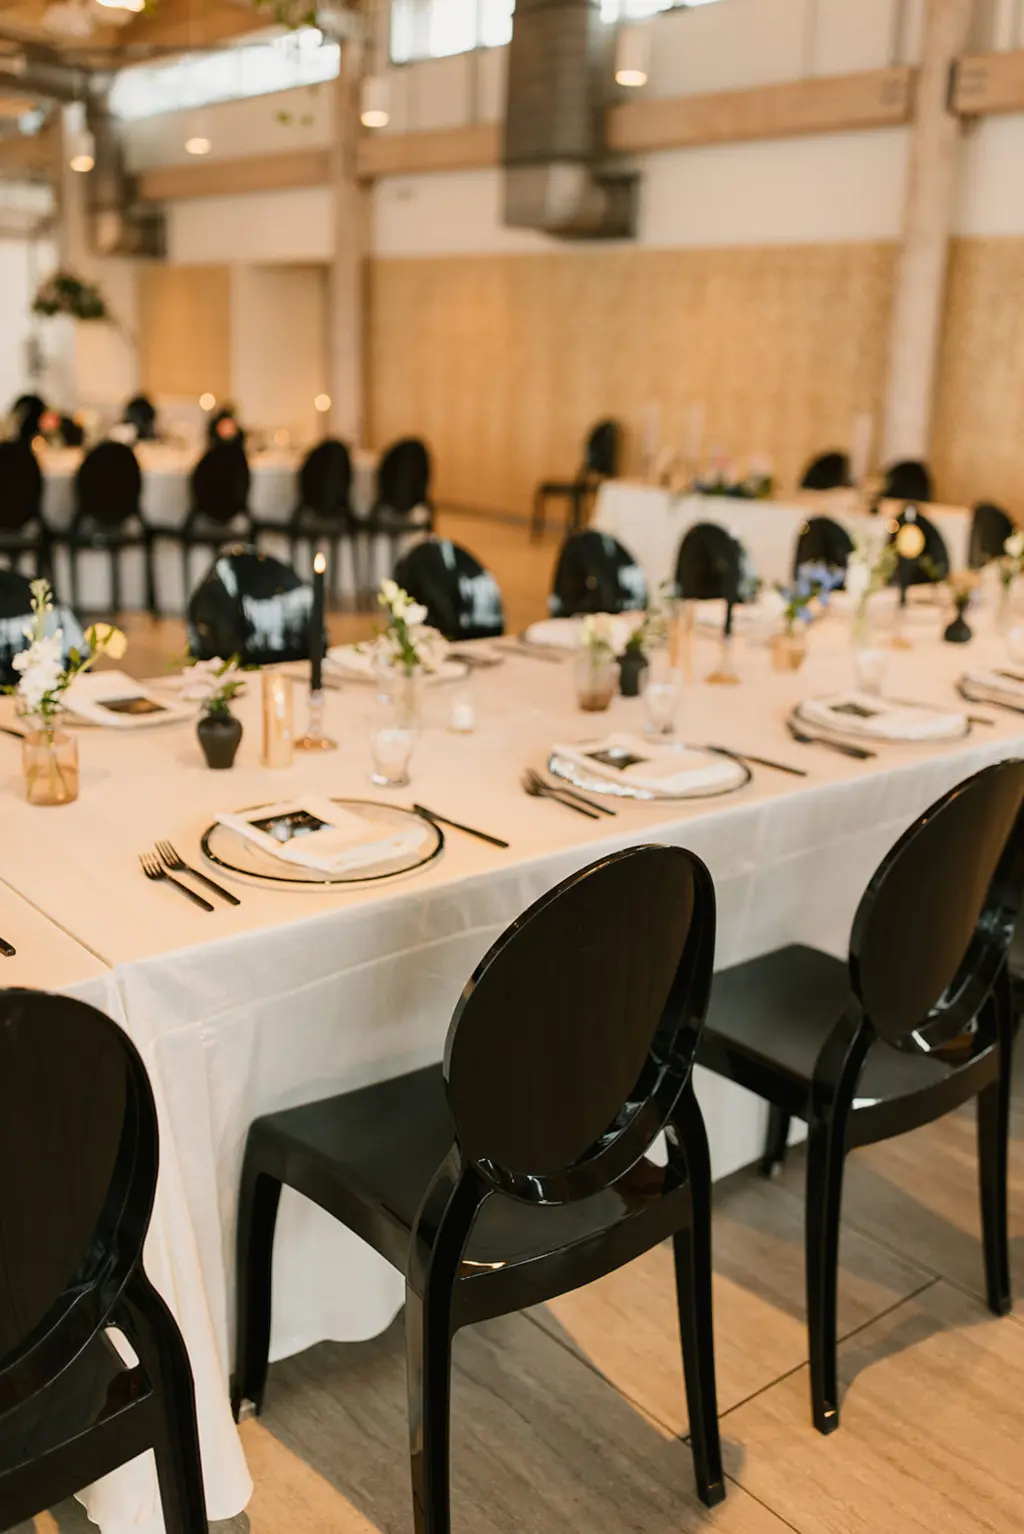 Modern Black Acrylic Chairs for Long Feasting Table from Tampa Bay Event Rentals A Chair Affair | Black and White Wedding Reception Decor Ideas